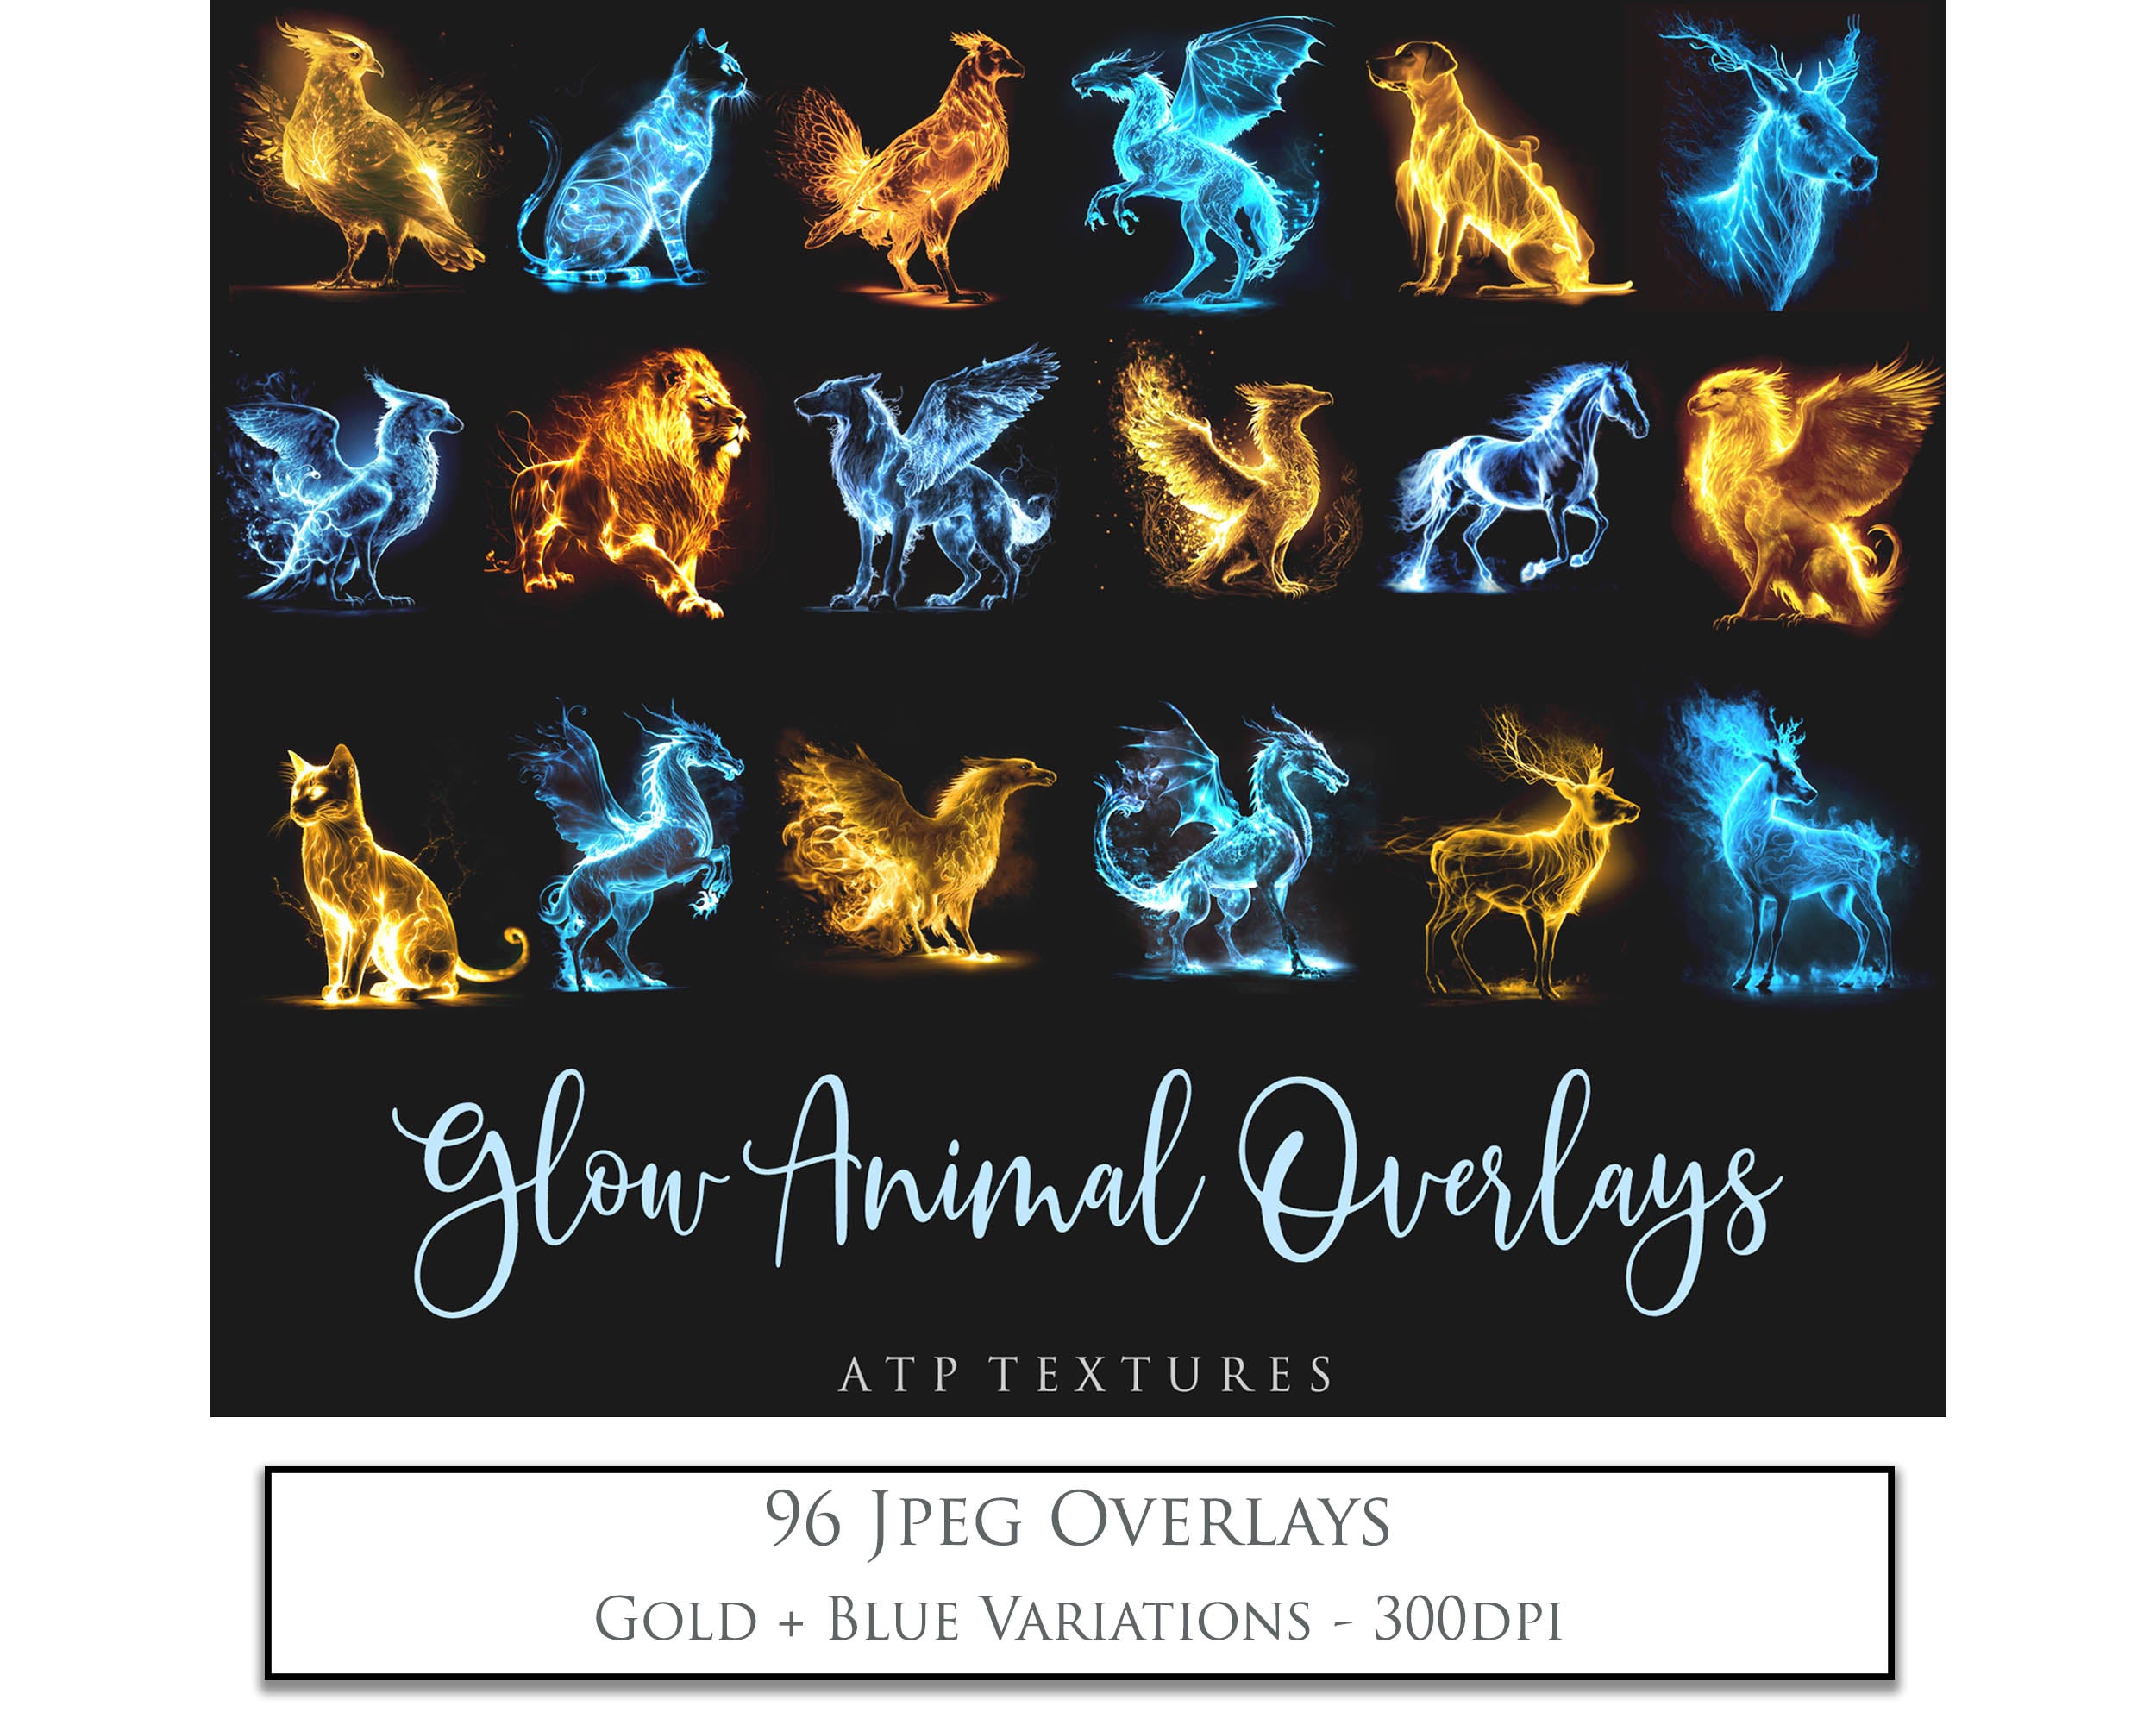 Glowing Patronus Animals. Glow overlays, 300dpi, Owl, Deer, Horse, Phoenix, Griffin. Atp textures, photo editing, Magical overlay. Harry Potter Photography. High resolution, digital download. Find more overlays, textures and Actions in my store. ATP Textures.